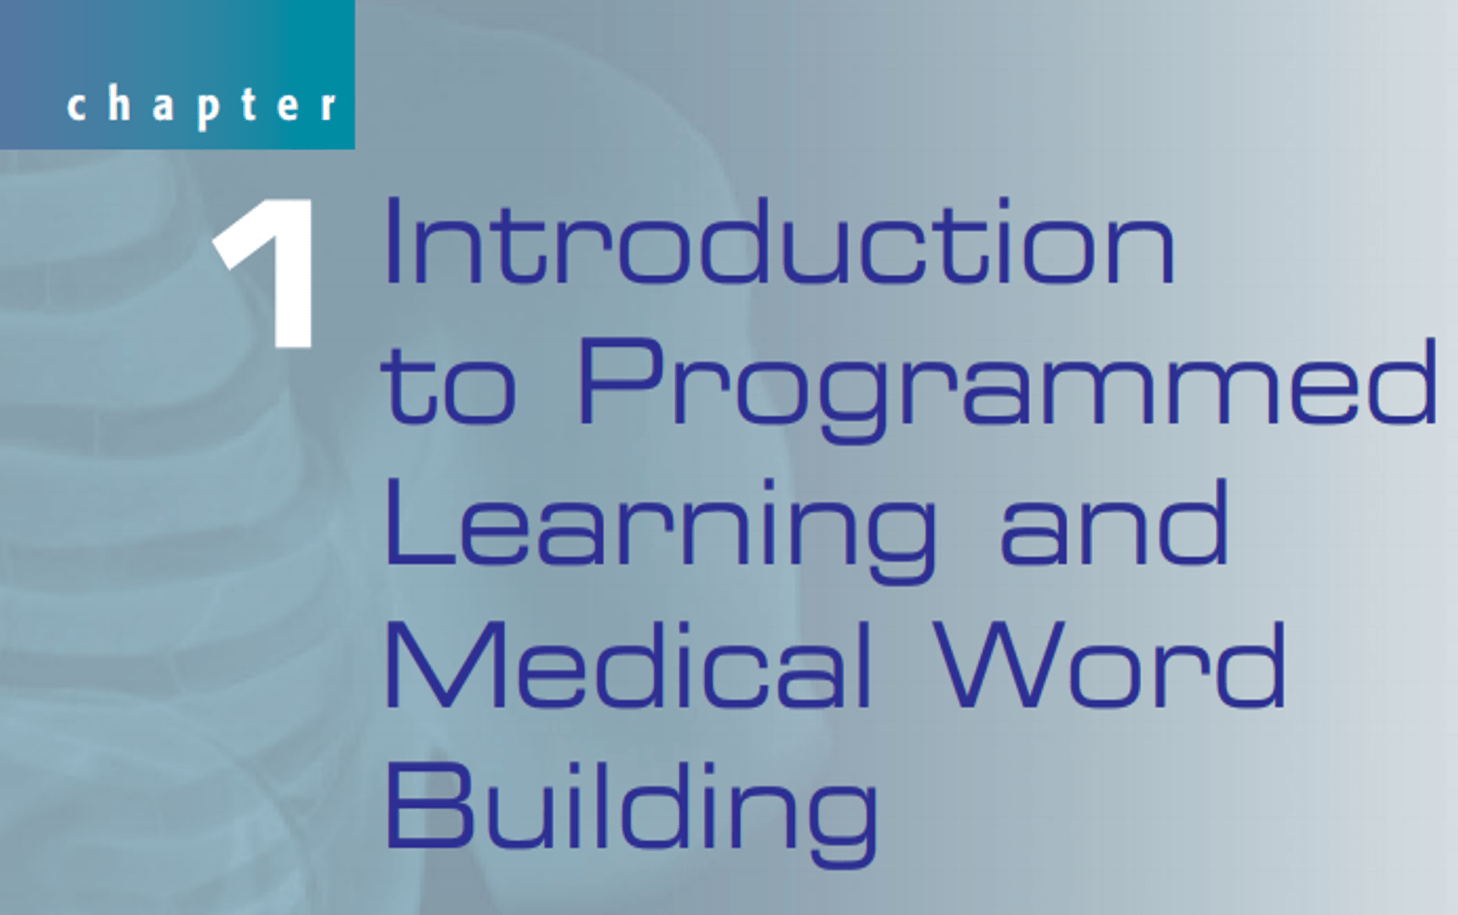 Chapter 1: Introduction to Programmed Learning and Medical Word Building